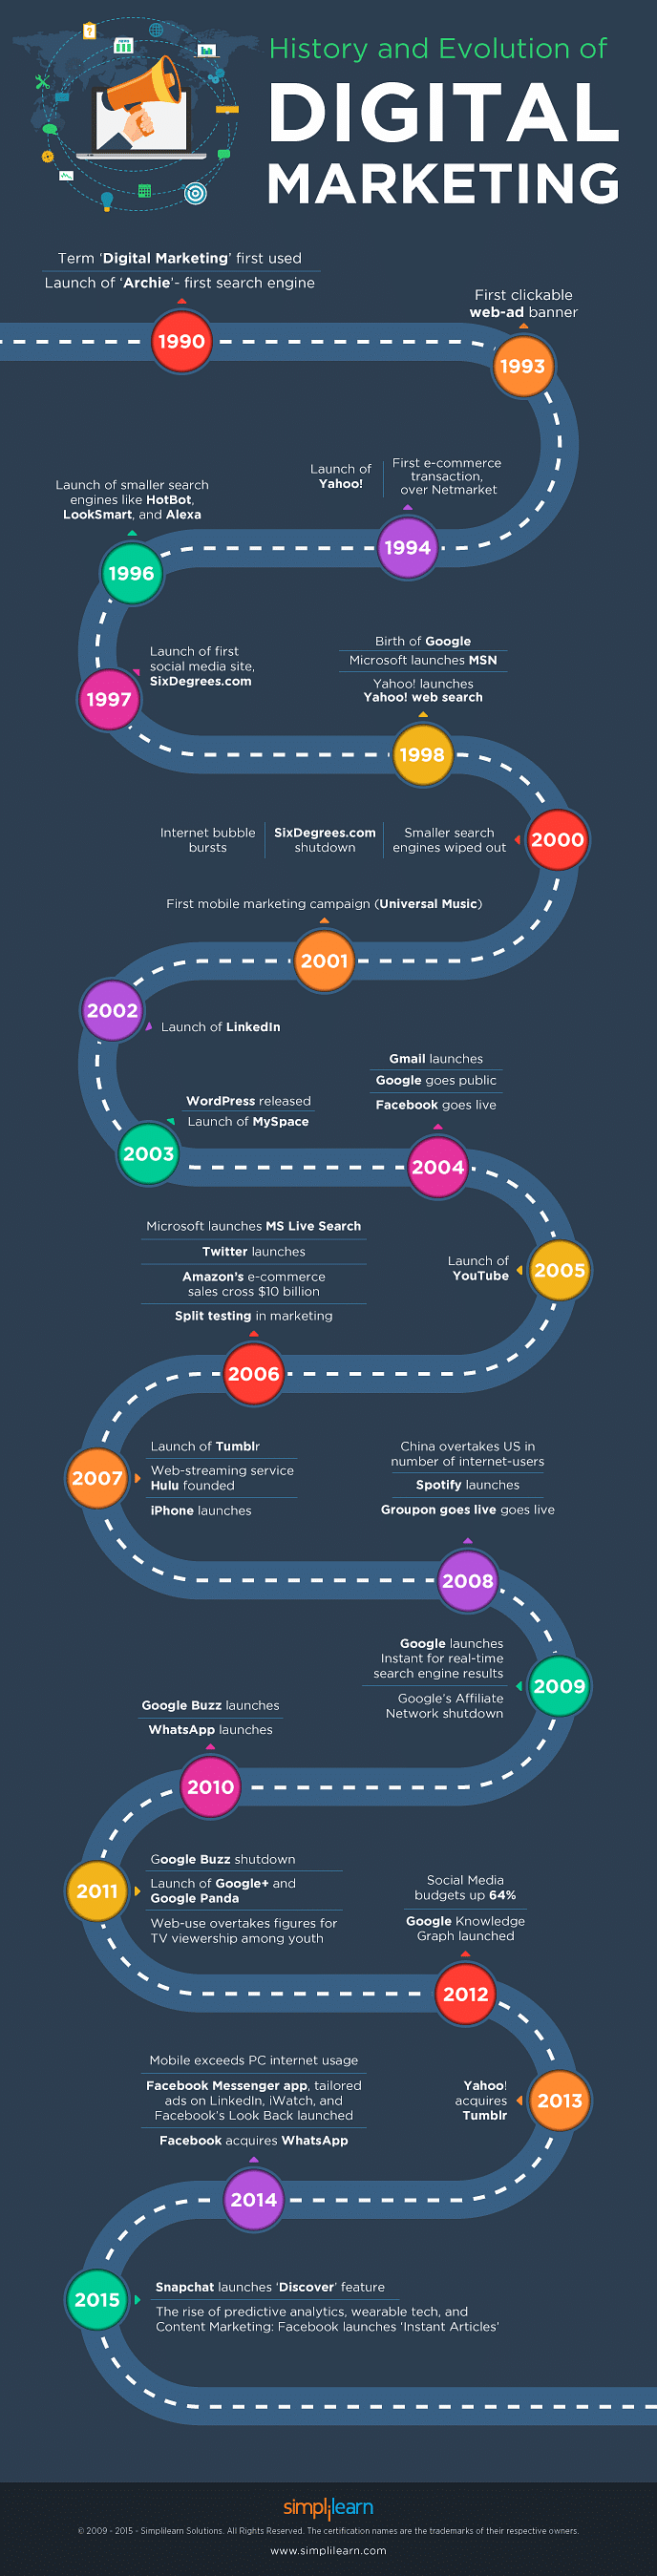 History and Evolution of Digital Marketing - Infographic